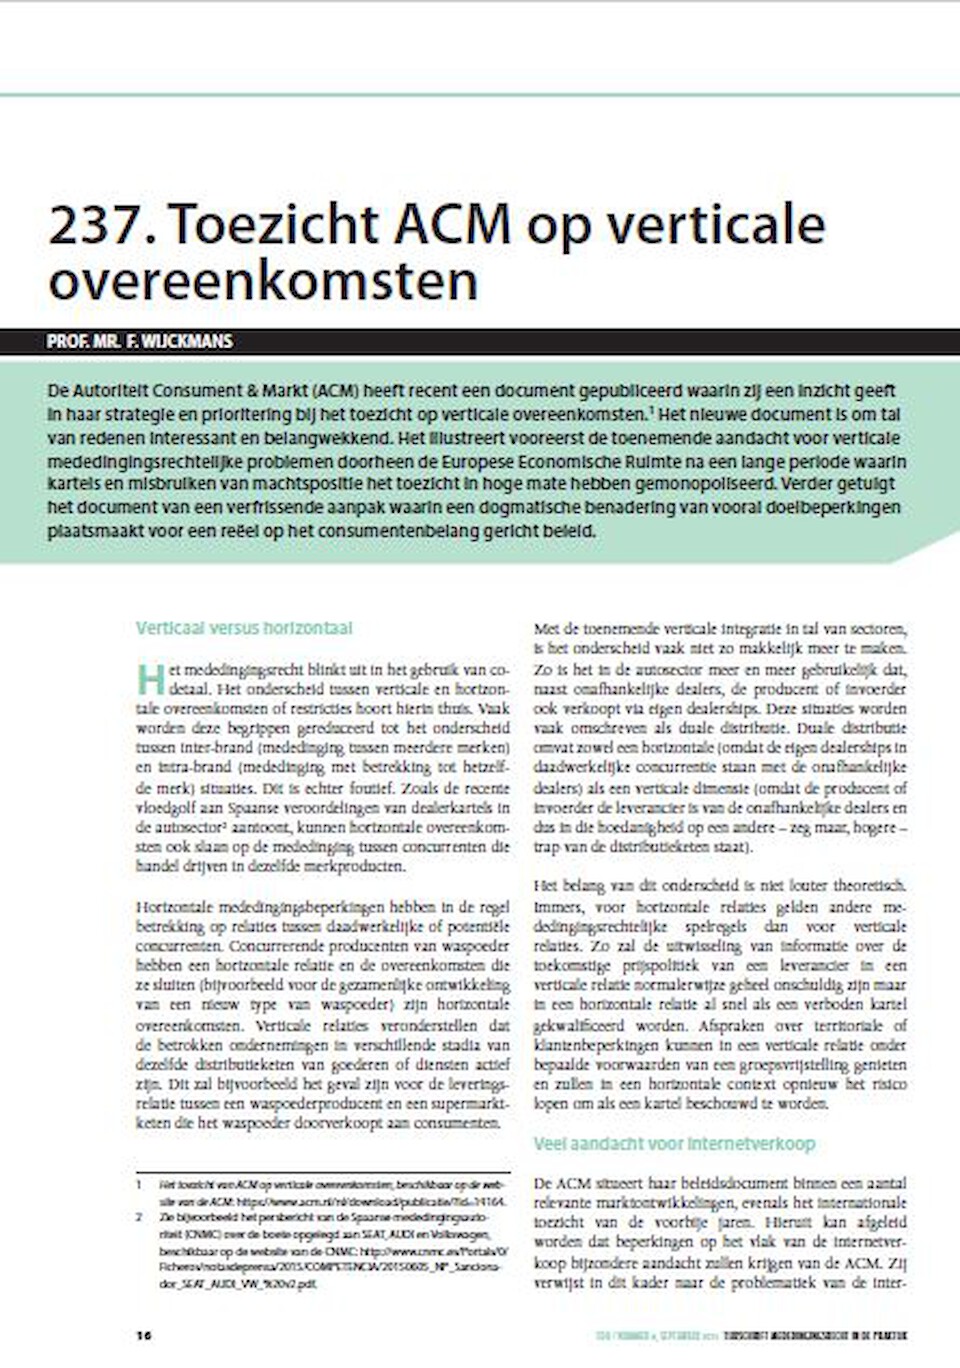 ACM supervision of vertical agreements